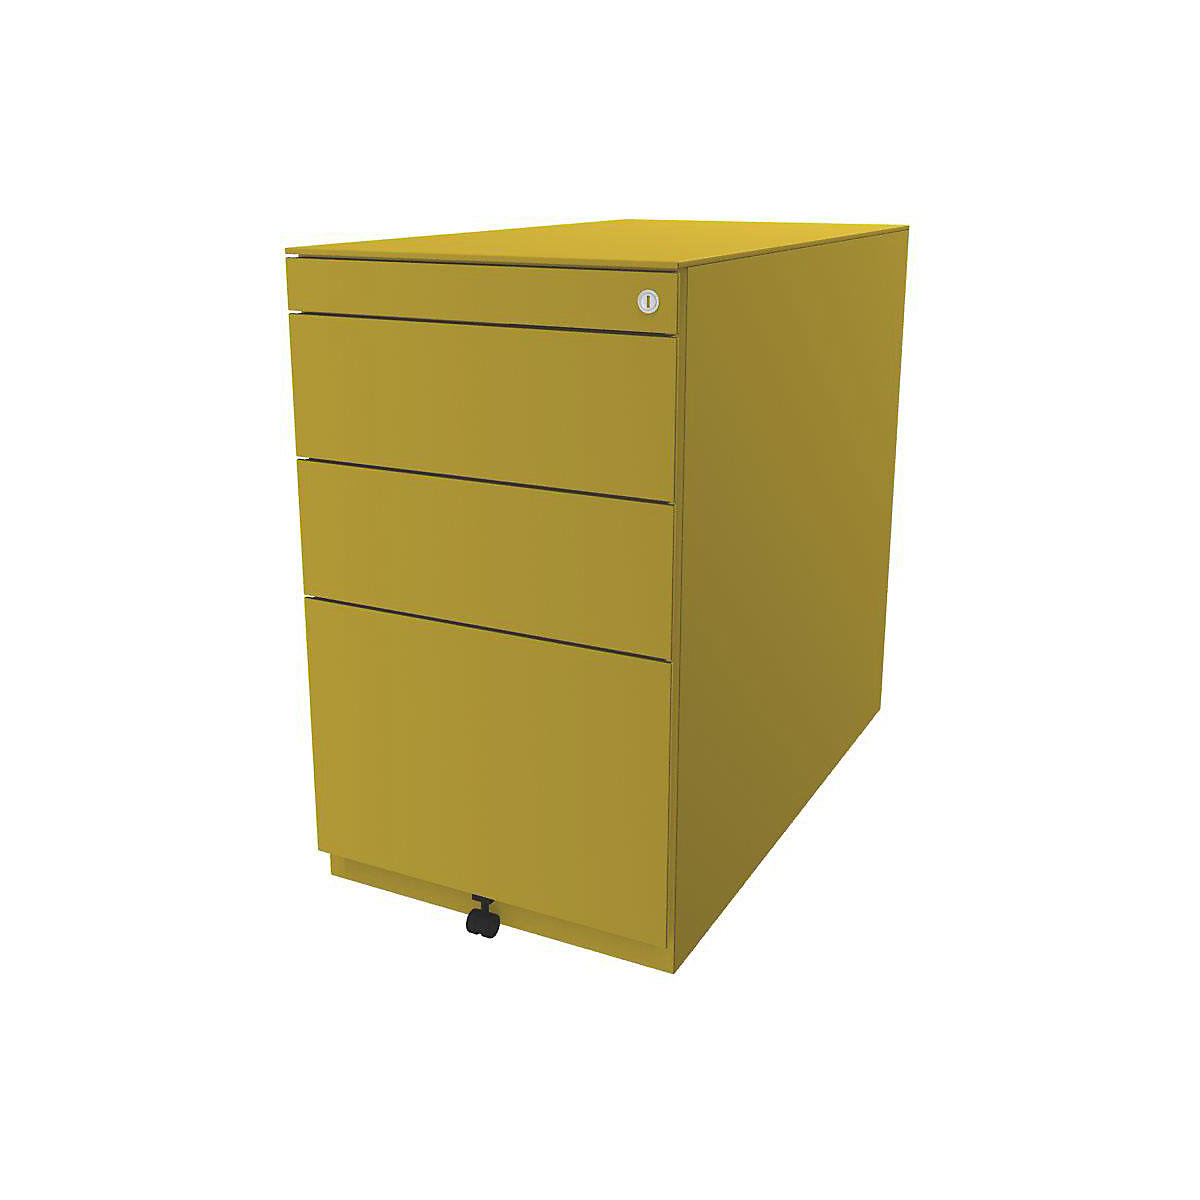 Note™ fixed pedestal, with 2 universal drawers, 1 suspension file drawer – BISLEY, with top, depth 775 mm, yellow-3